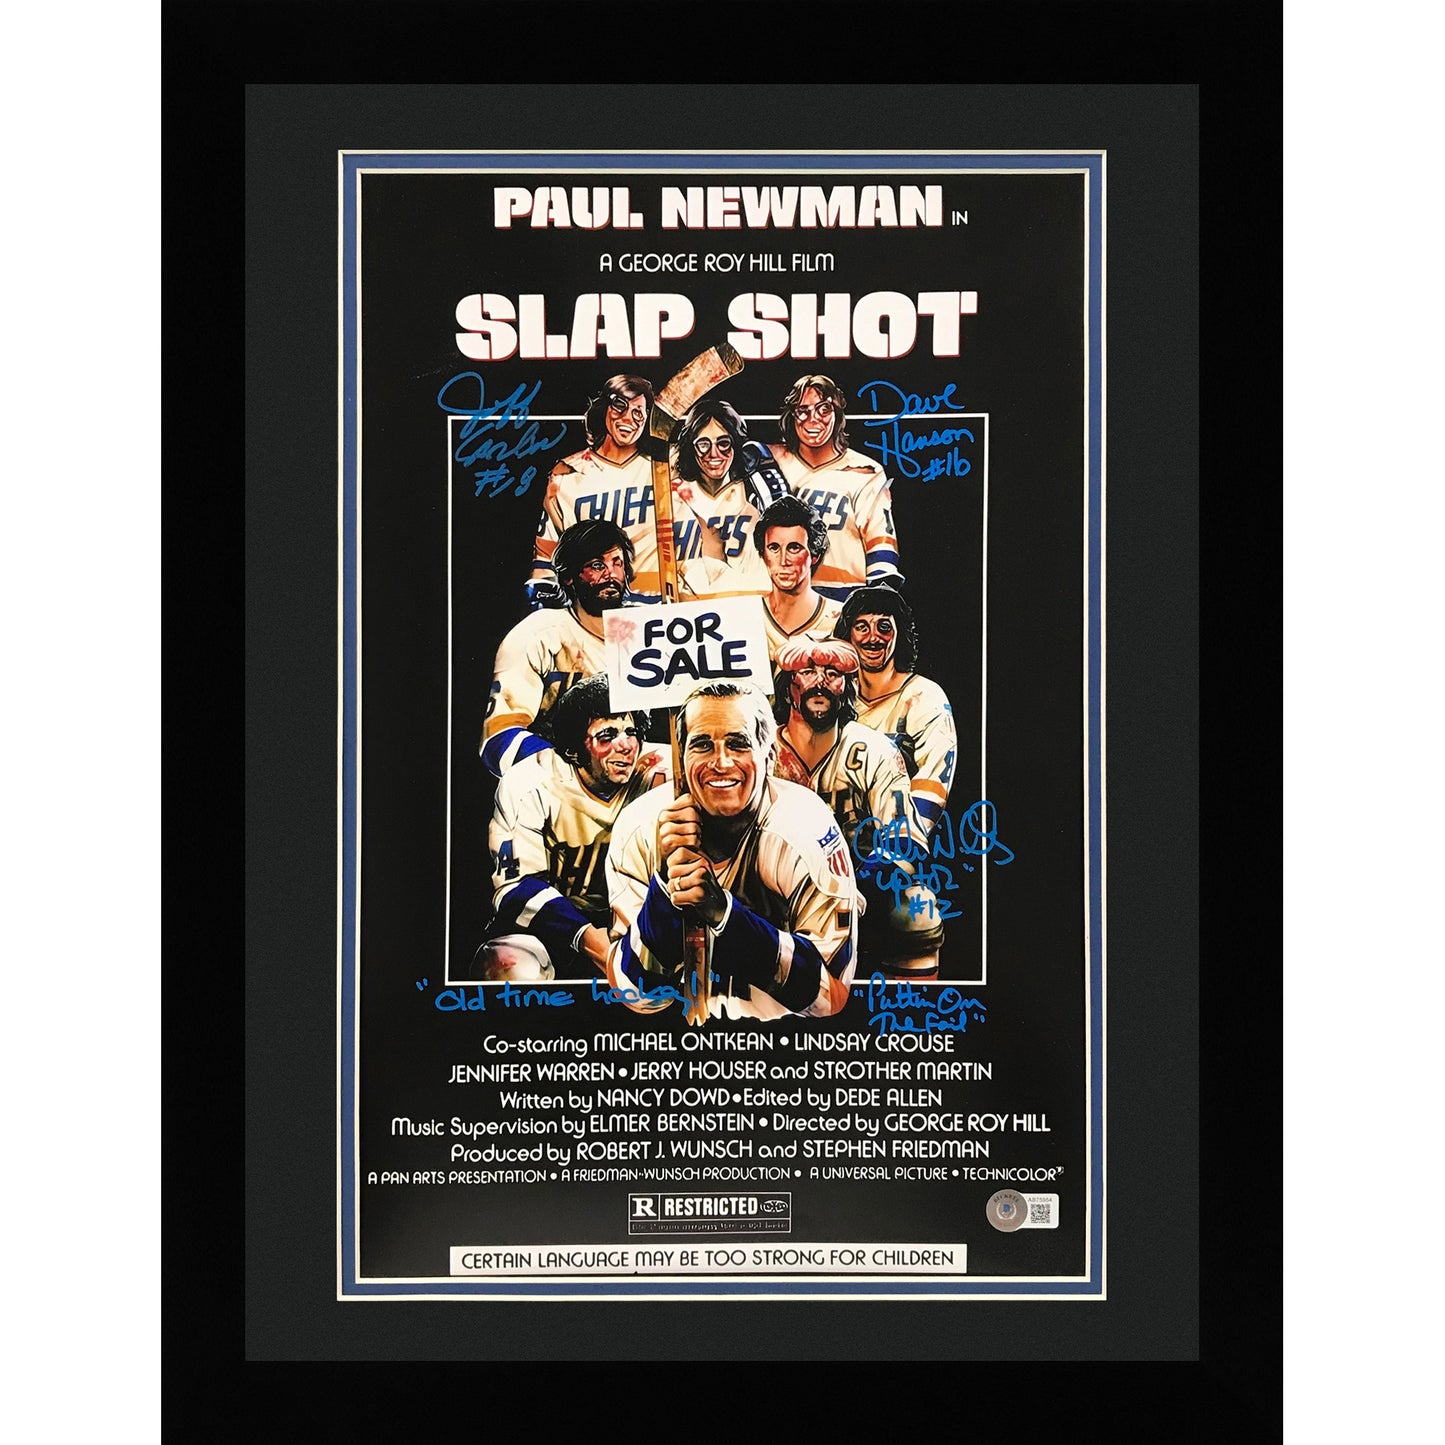 Hanson Brothers Autographed Slap Shot Movie Deluxe Framed 11x17 Movie Poster w/ Inscriptions - Beckett